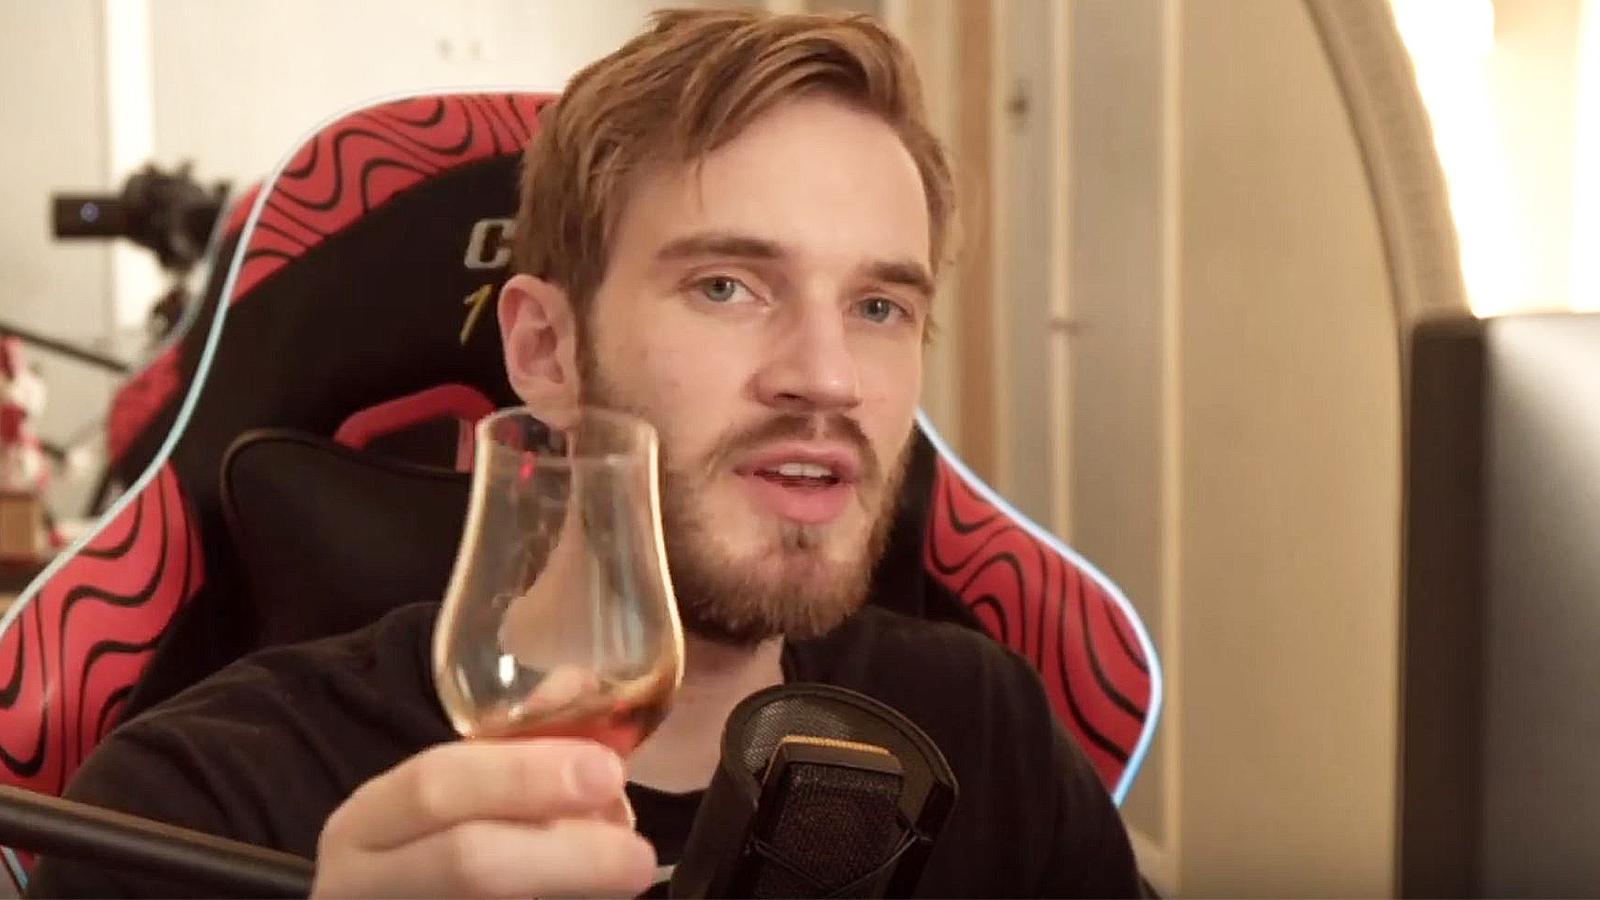 PewDiePie toasts his viewers after announcing his YouTube hiatus